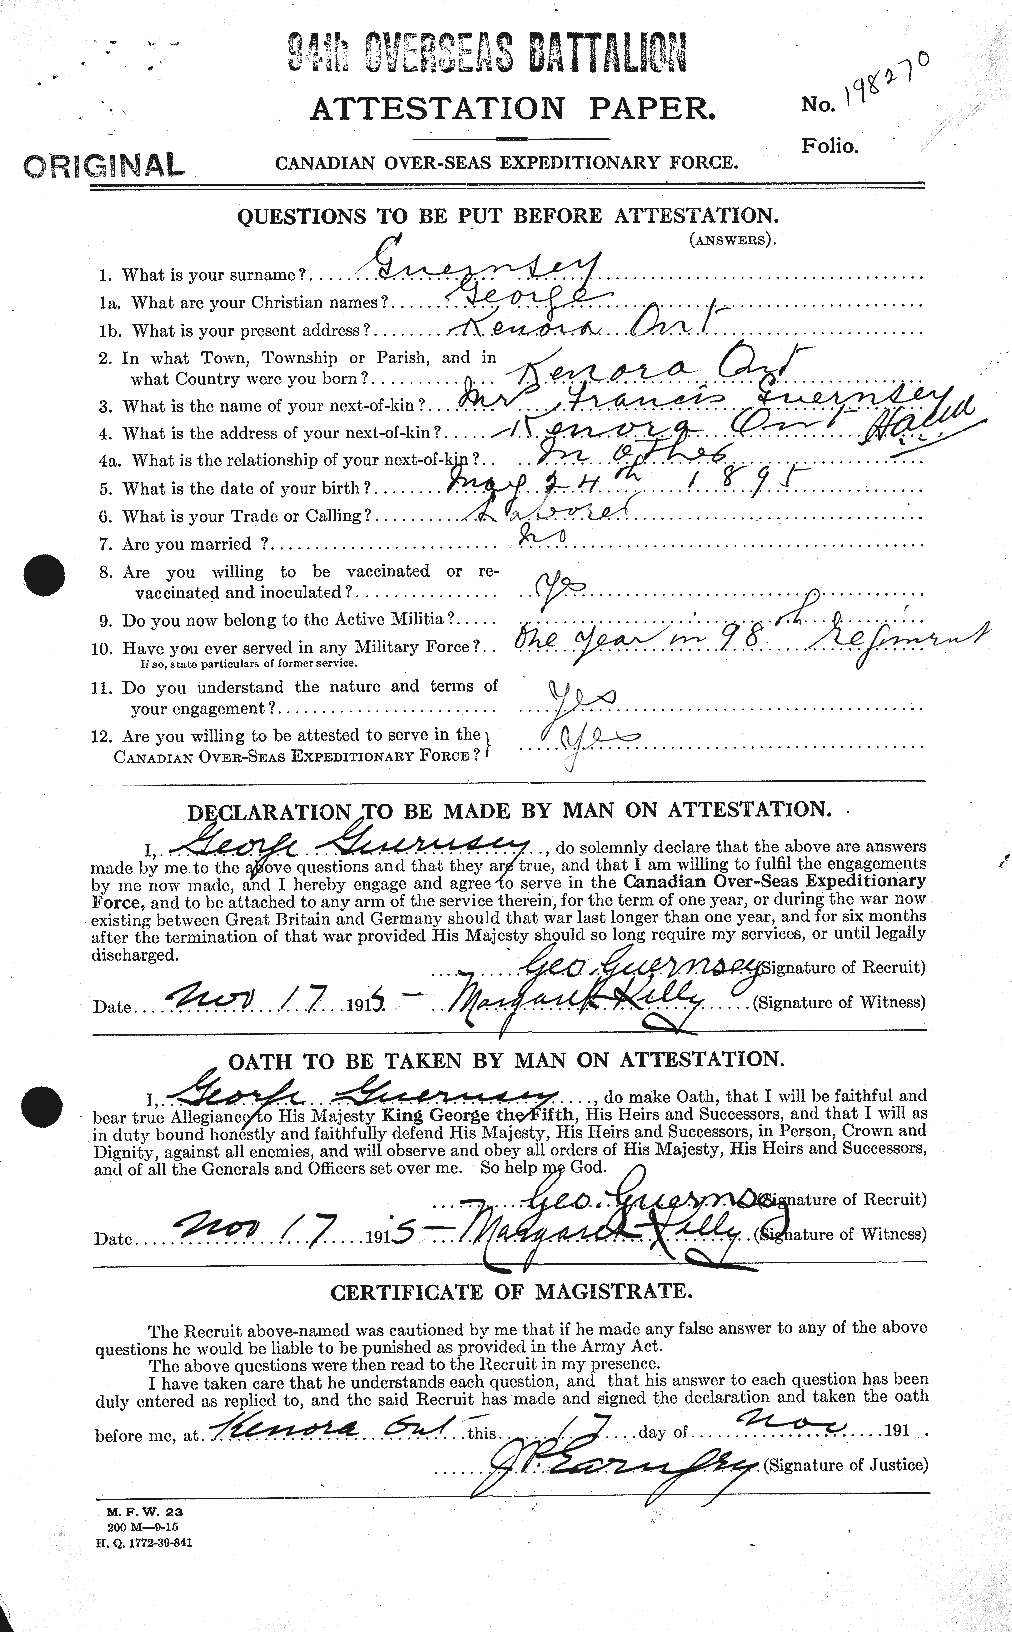 Personnel Records of the First World War - CEF 369728a